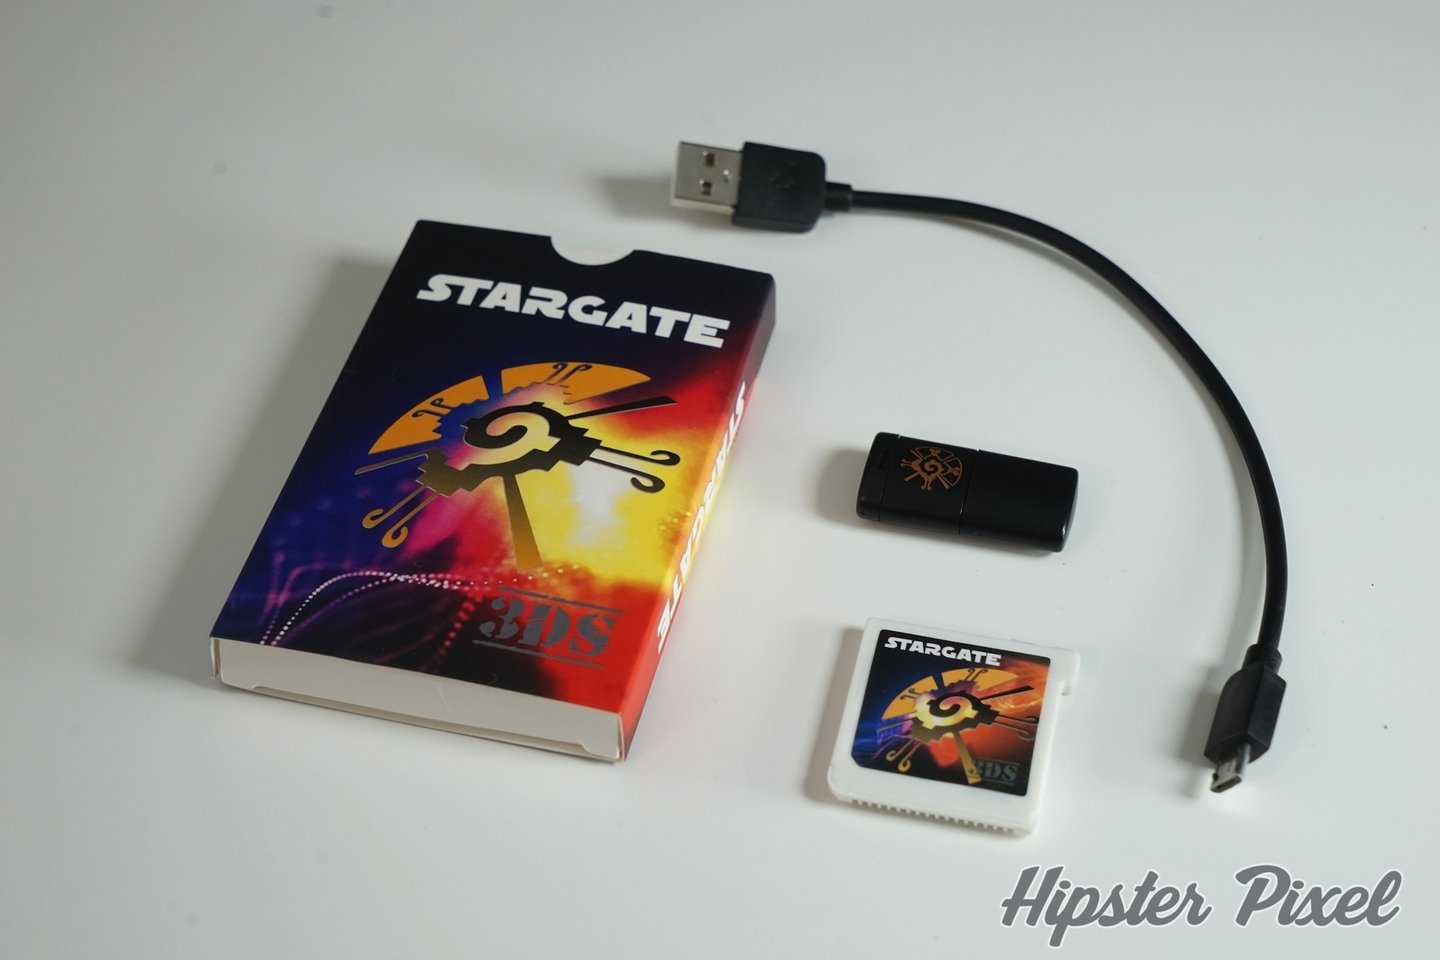 Stargate 3DS Flashcard Review